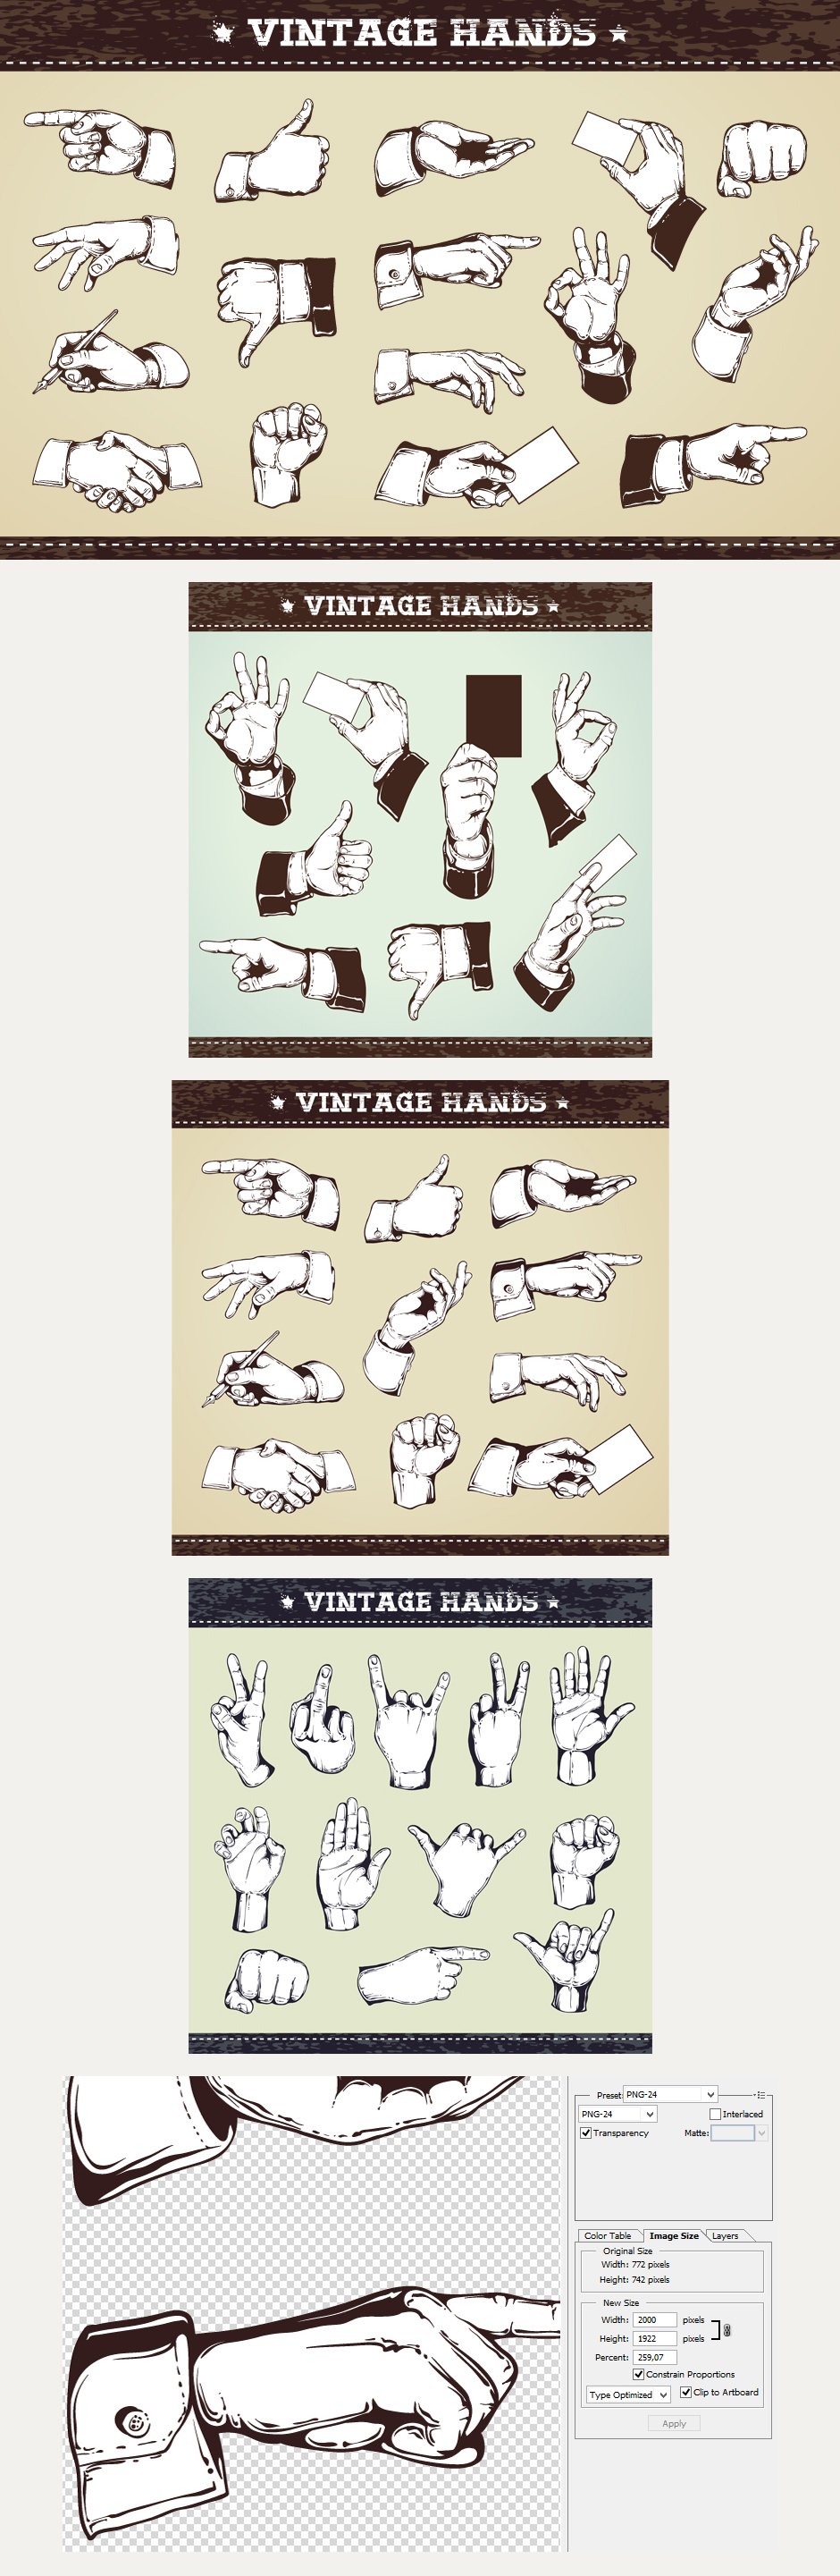 Vintage Hands Vector Icons